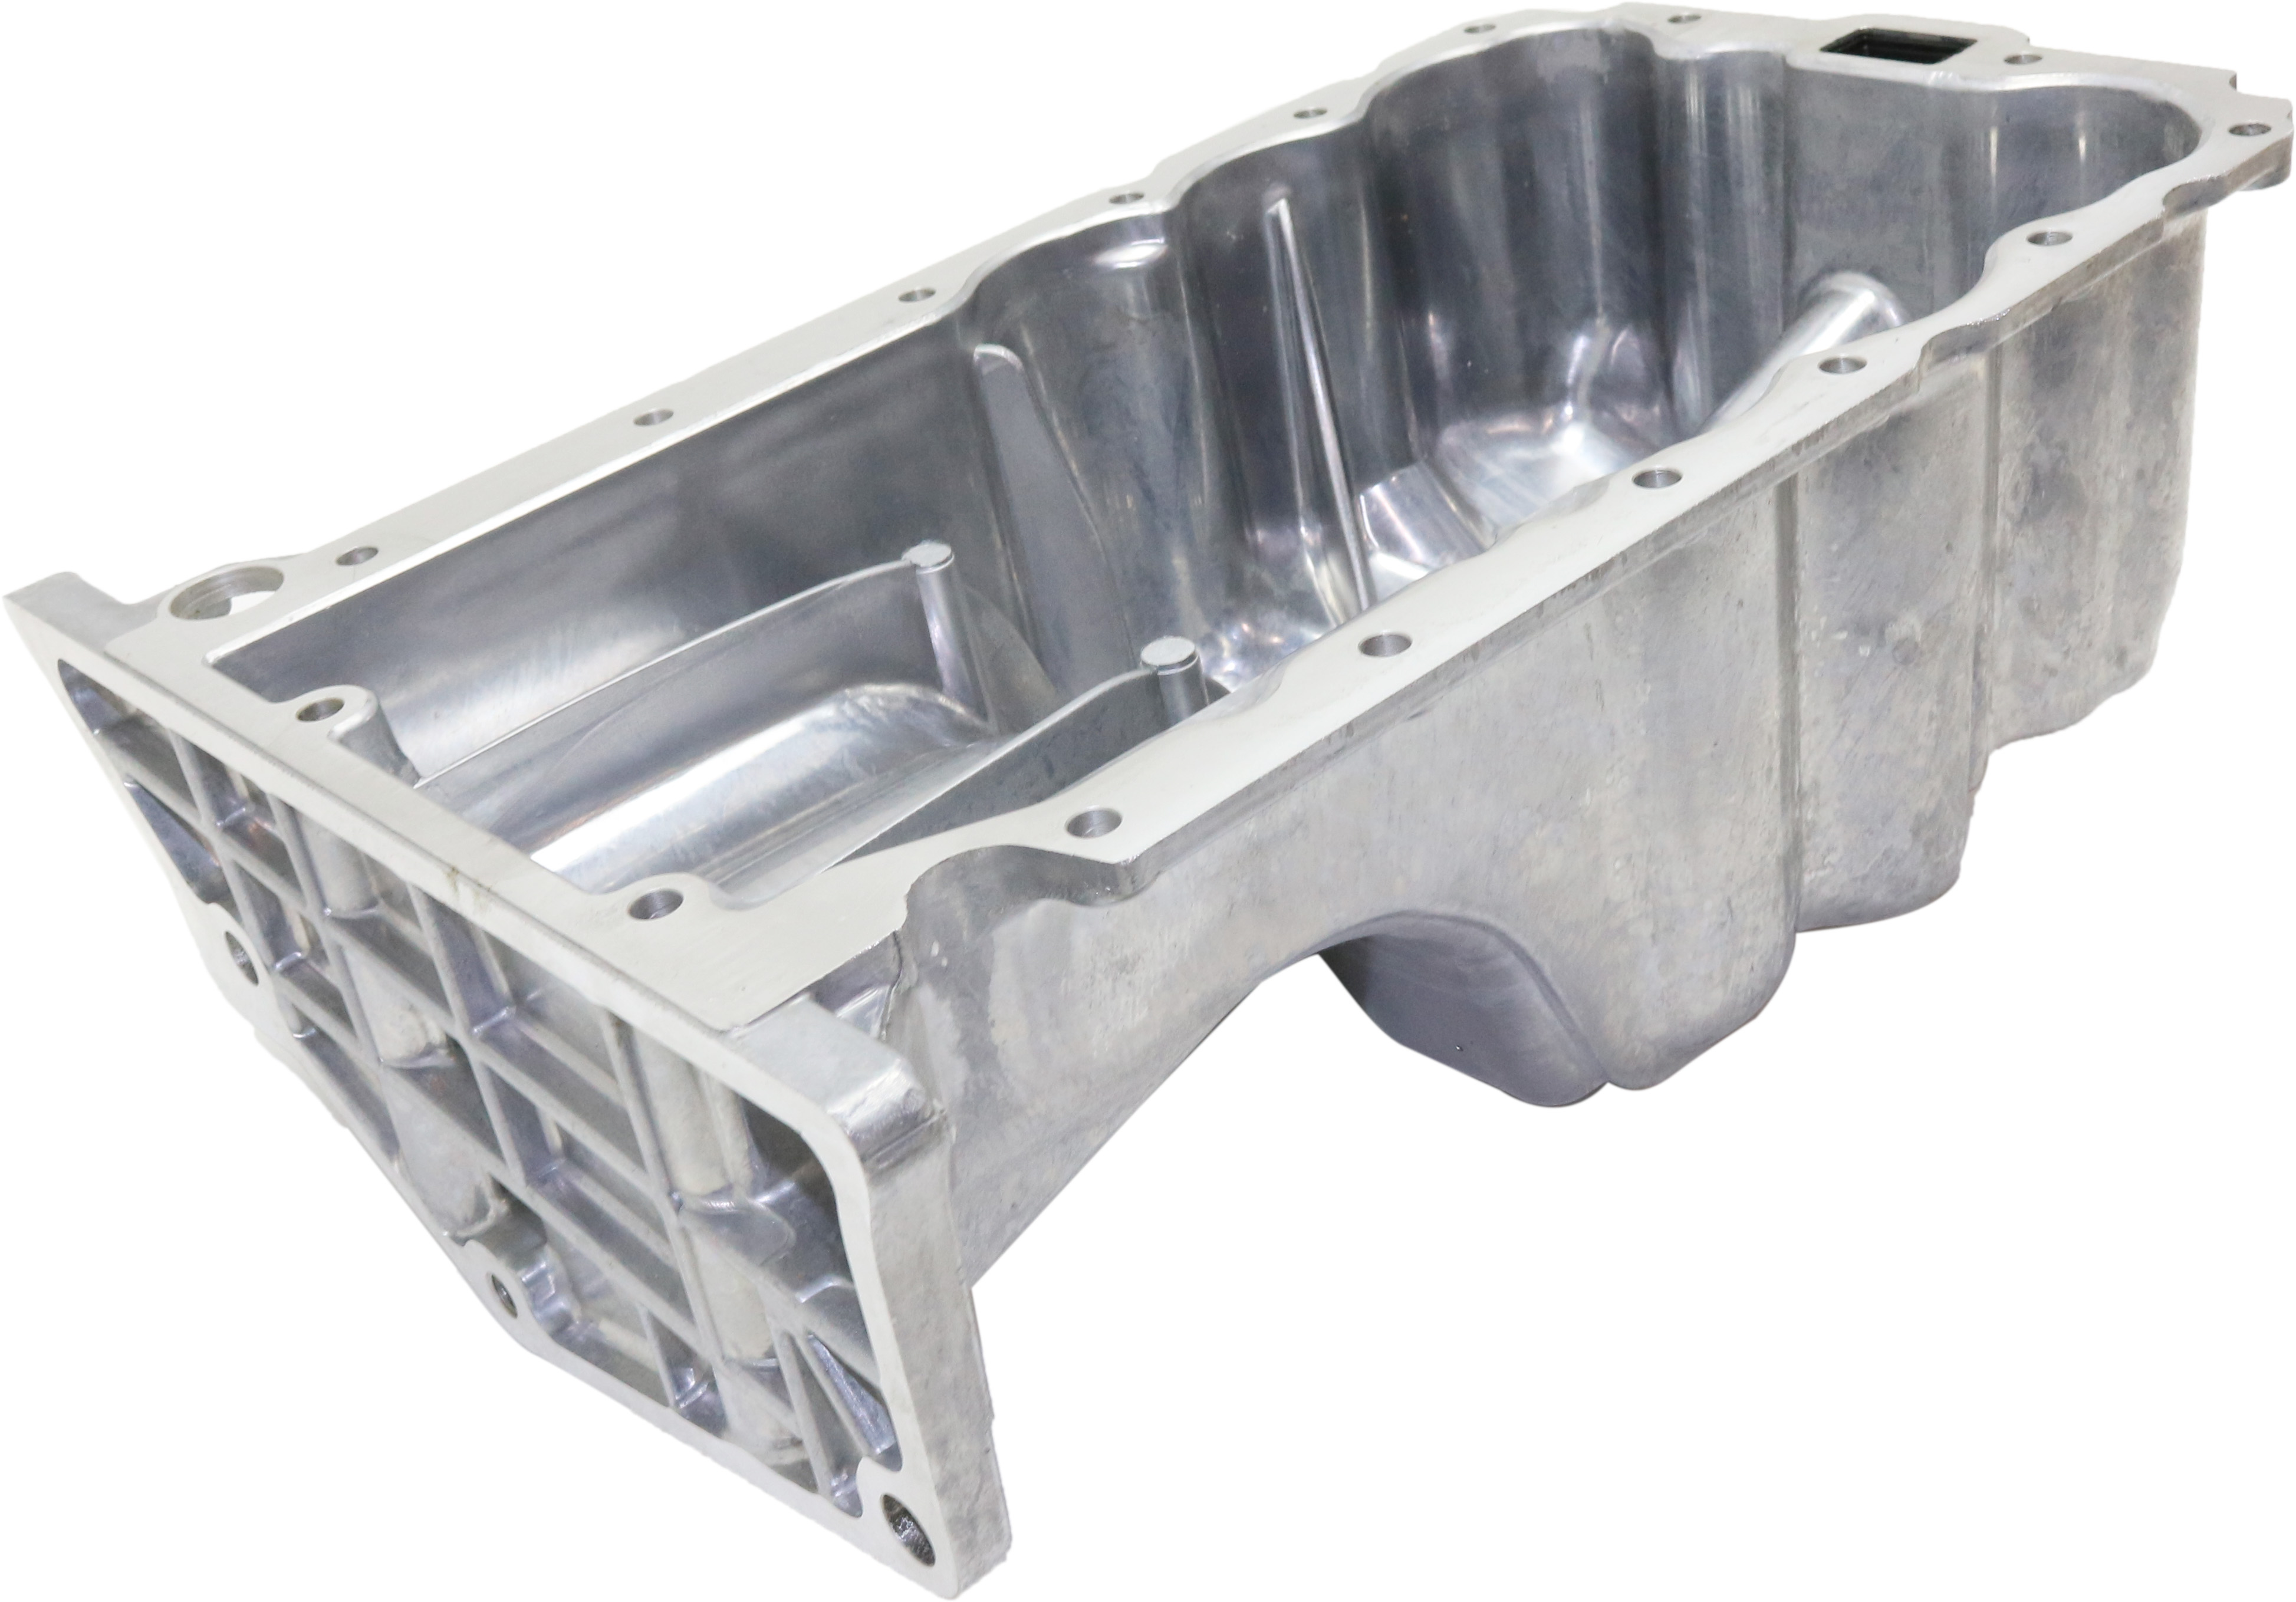 Replacement RC31130002 Oil Pan Compatible with 2011-2015 Chevrolet Cruze 2013-2016 Buick Encore 4Cyl 1.4L Aluminum - image 3 of 3